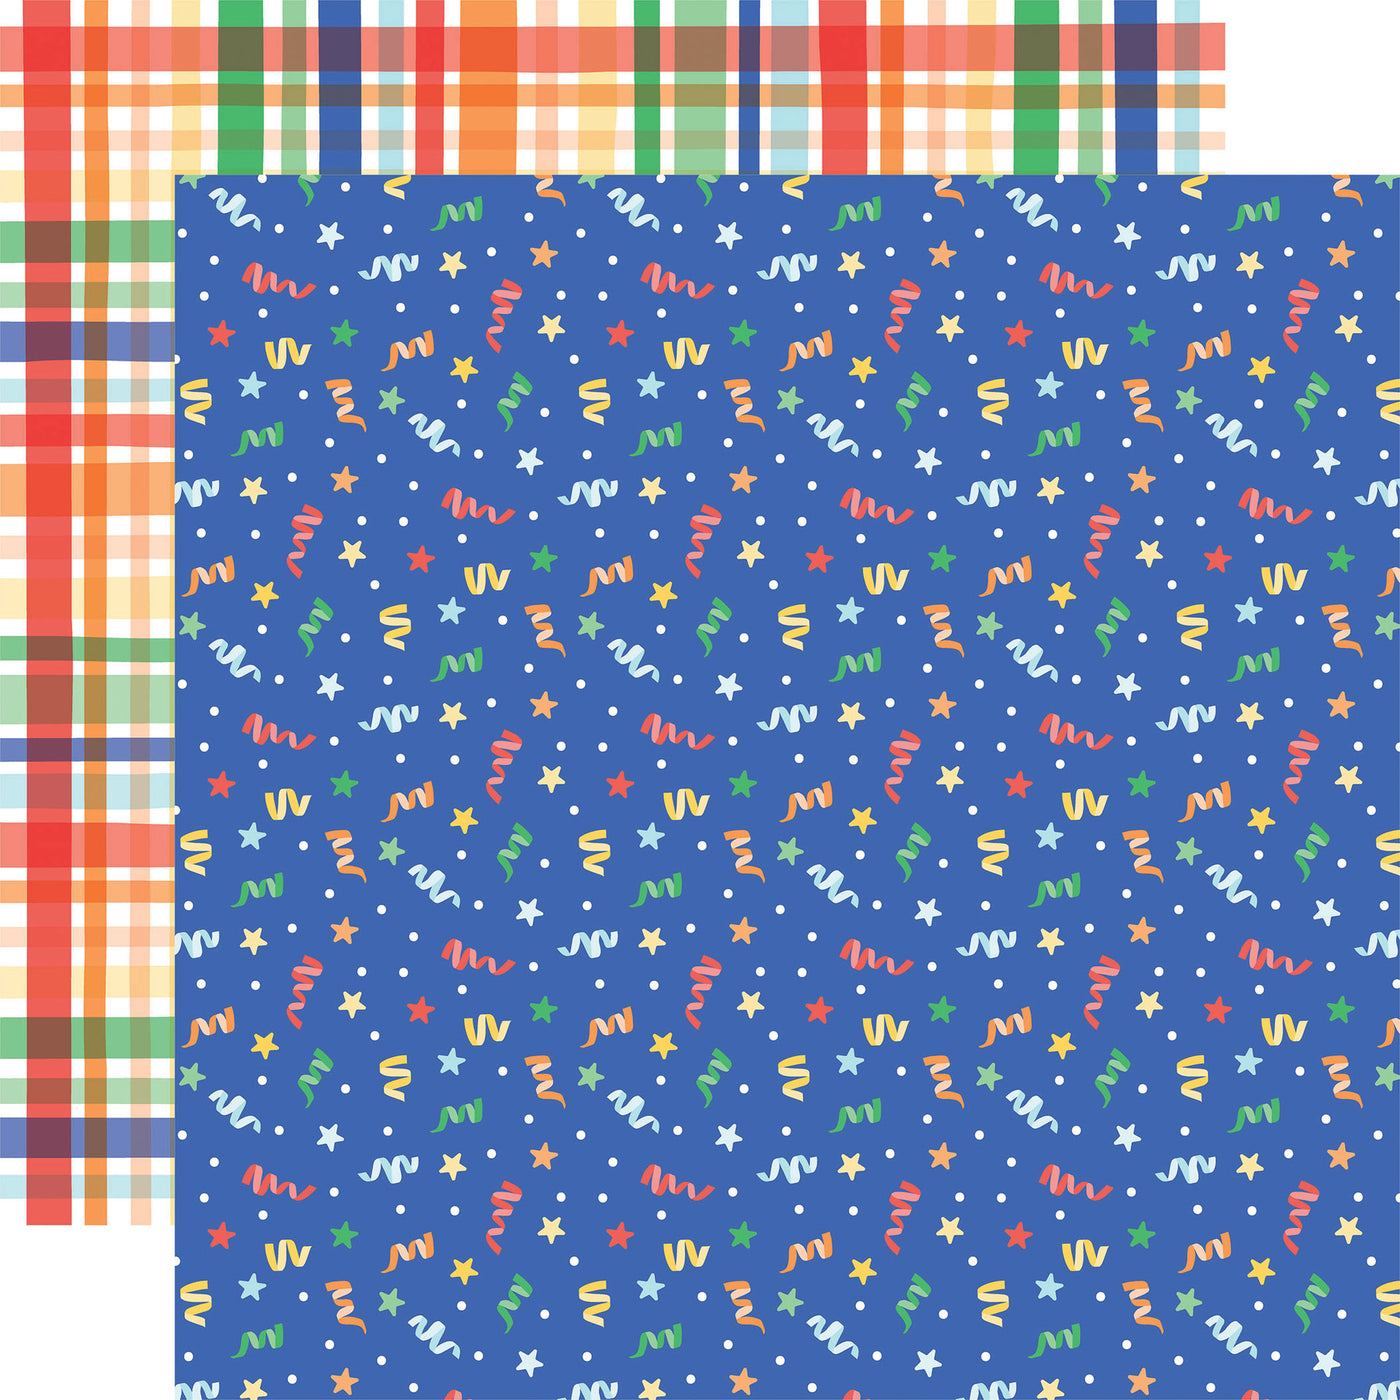 12x12 double-sided multi-colored patterned paper from Echo Park Paper (colorful birthday confetti on a blue background, colorful plaid in coordinating colors on a white background reverse)